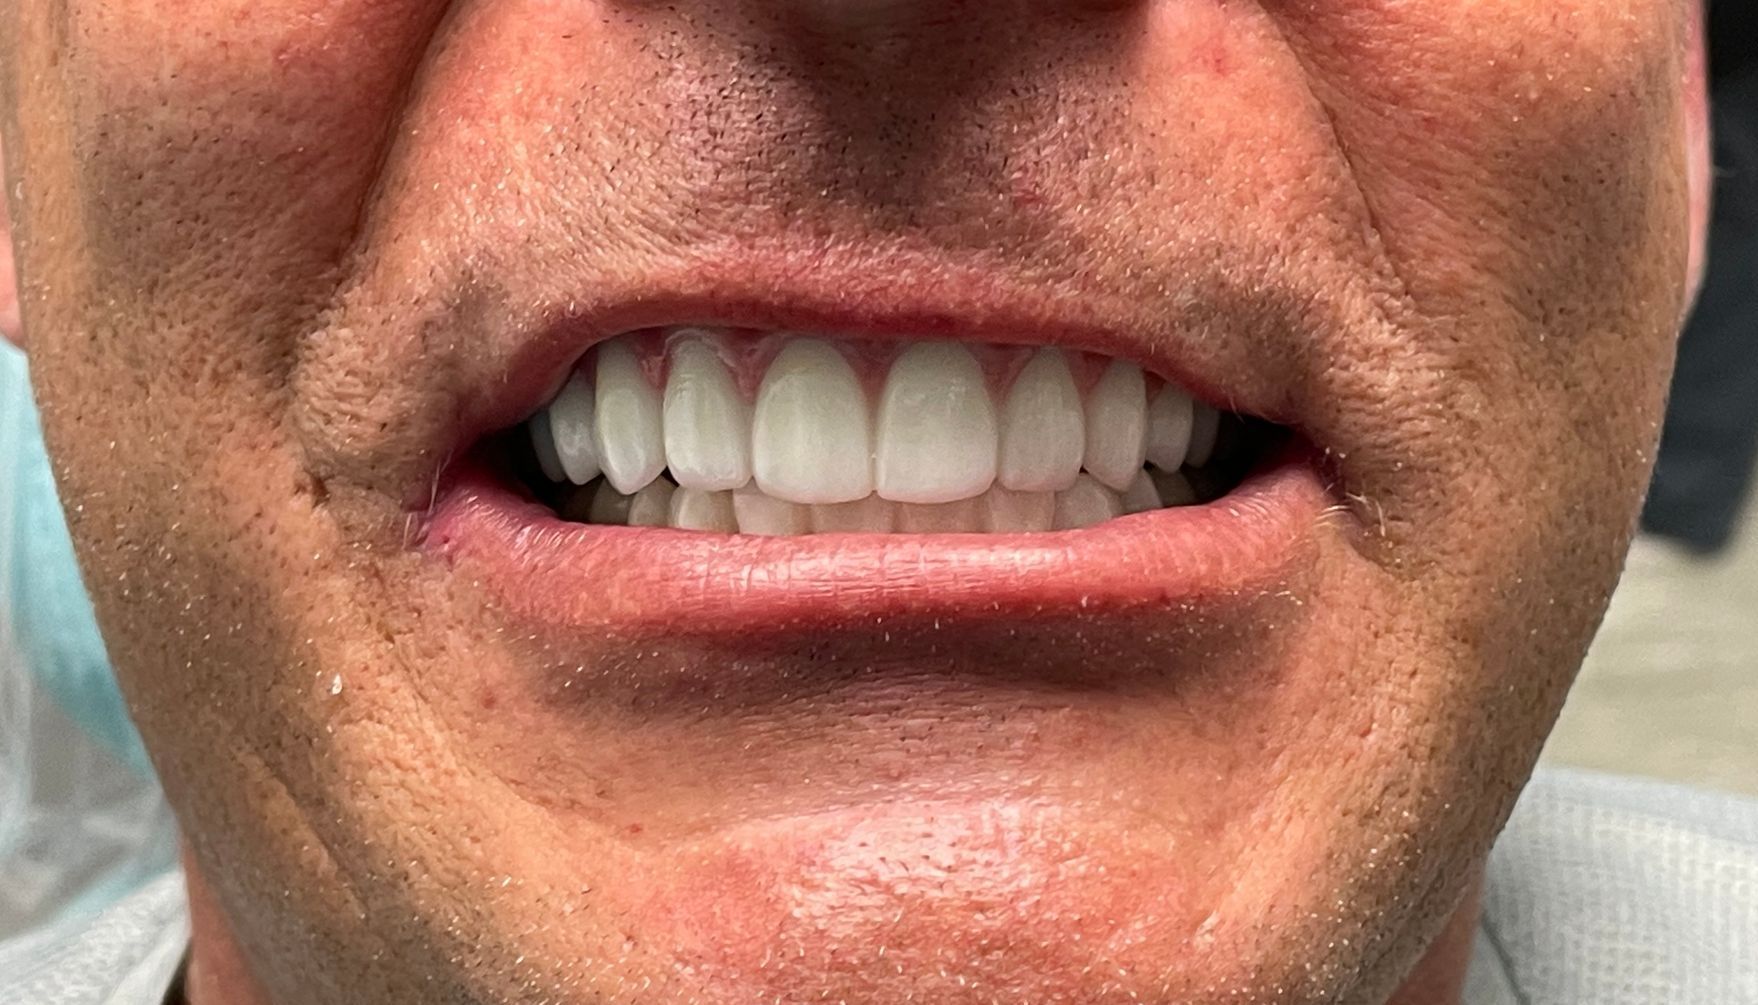 a close up of a man 's mouth with white teeth | All on X - Full Mouth Dental Implants | Before and After Dental Treatments | Barclay Family Dental | Best Dentist For Family Dentistry, Dental Implants, and Cosmetic Dentistry in Cherry Hill, NJ